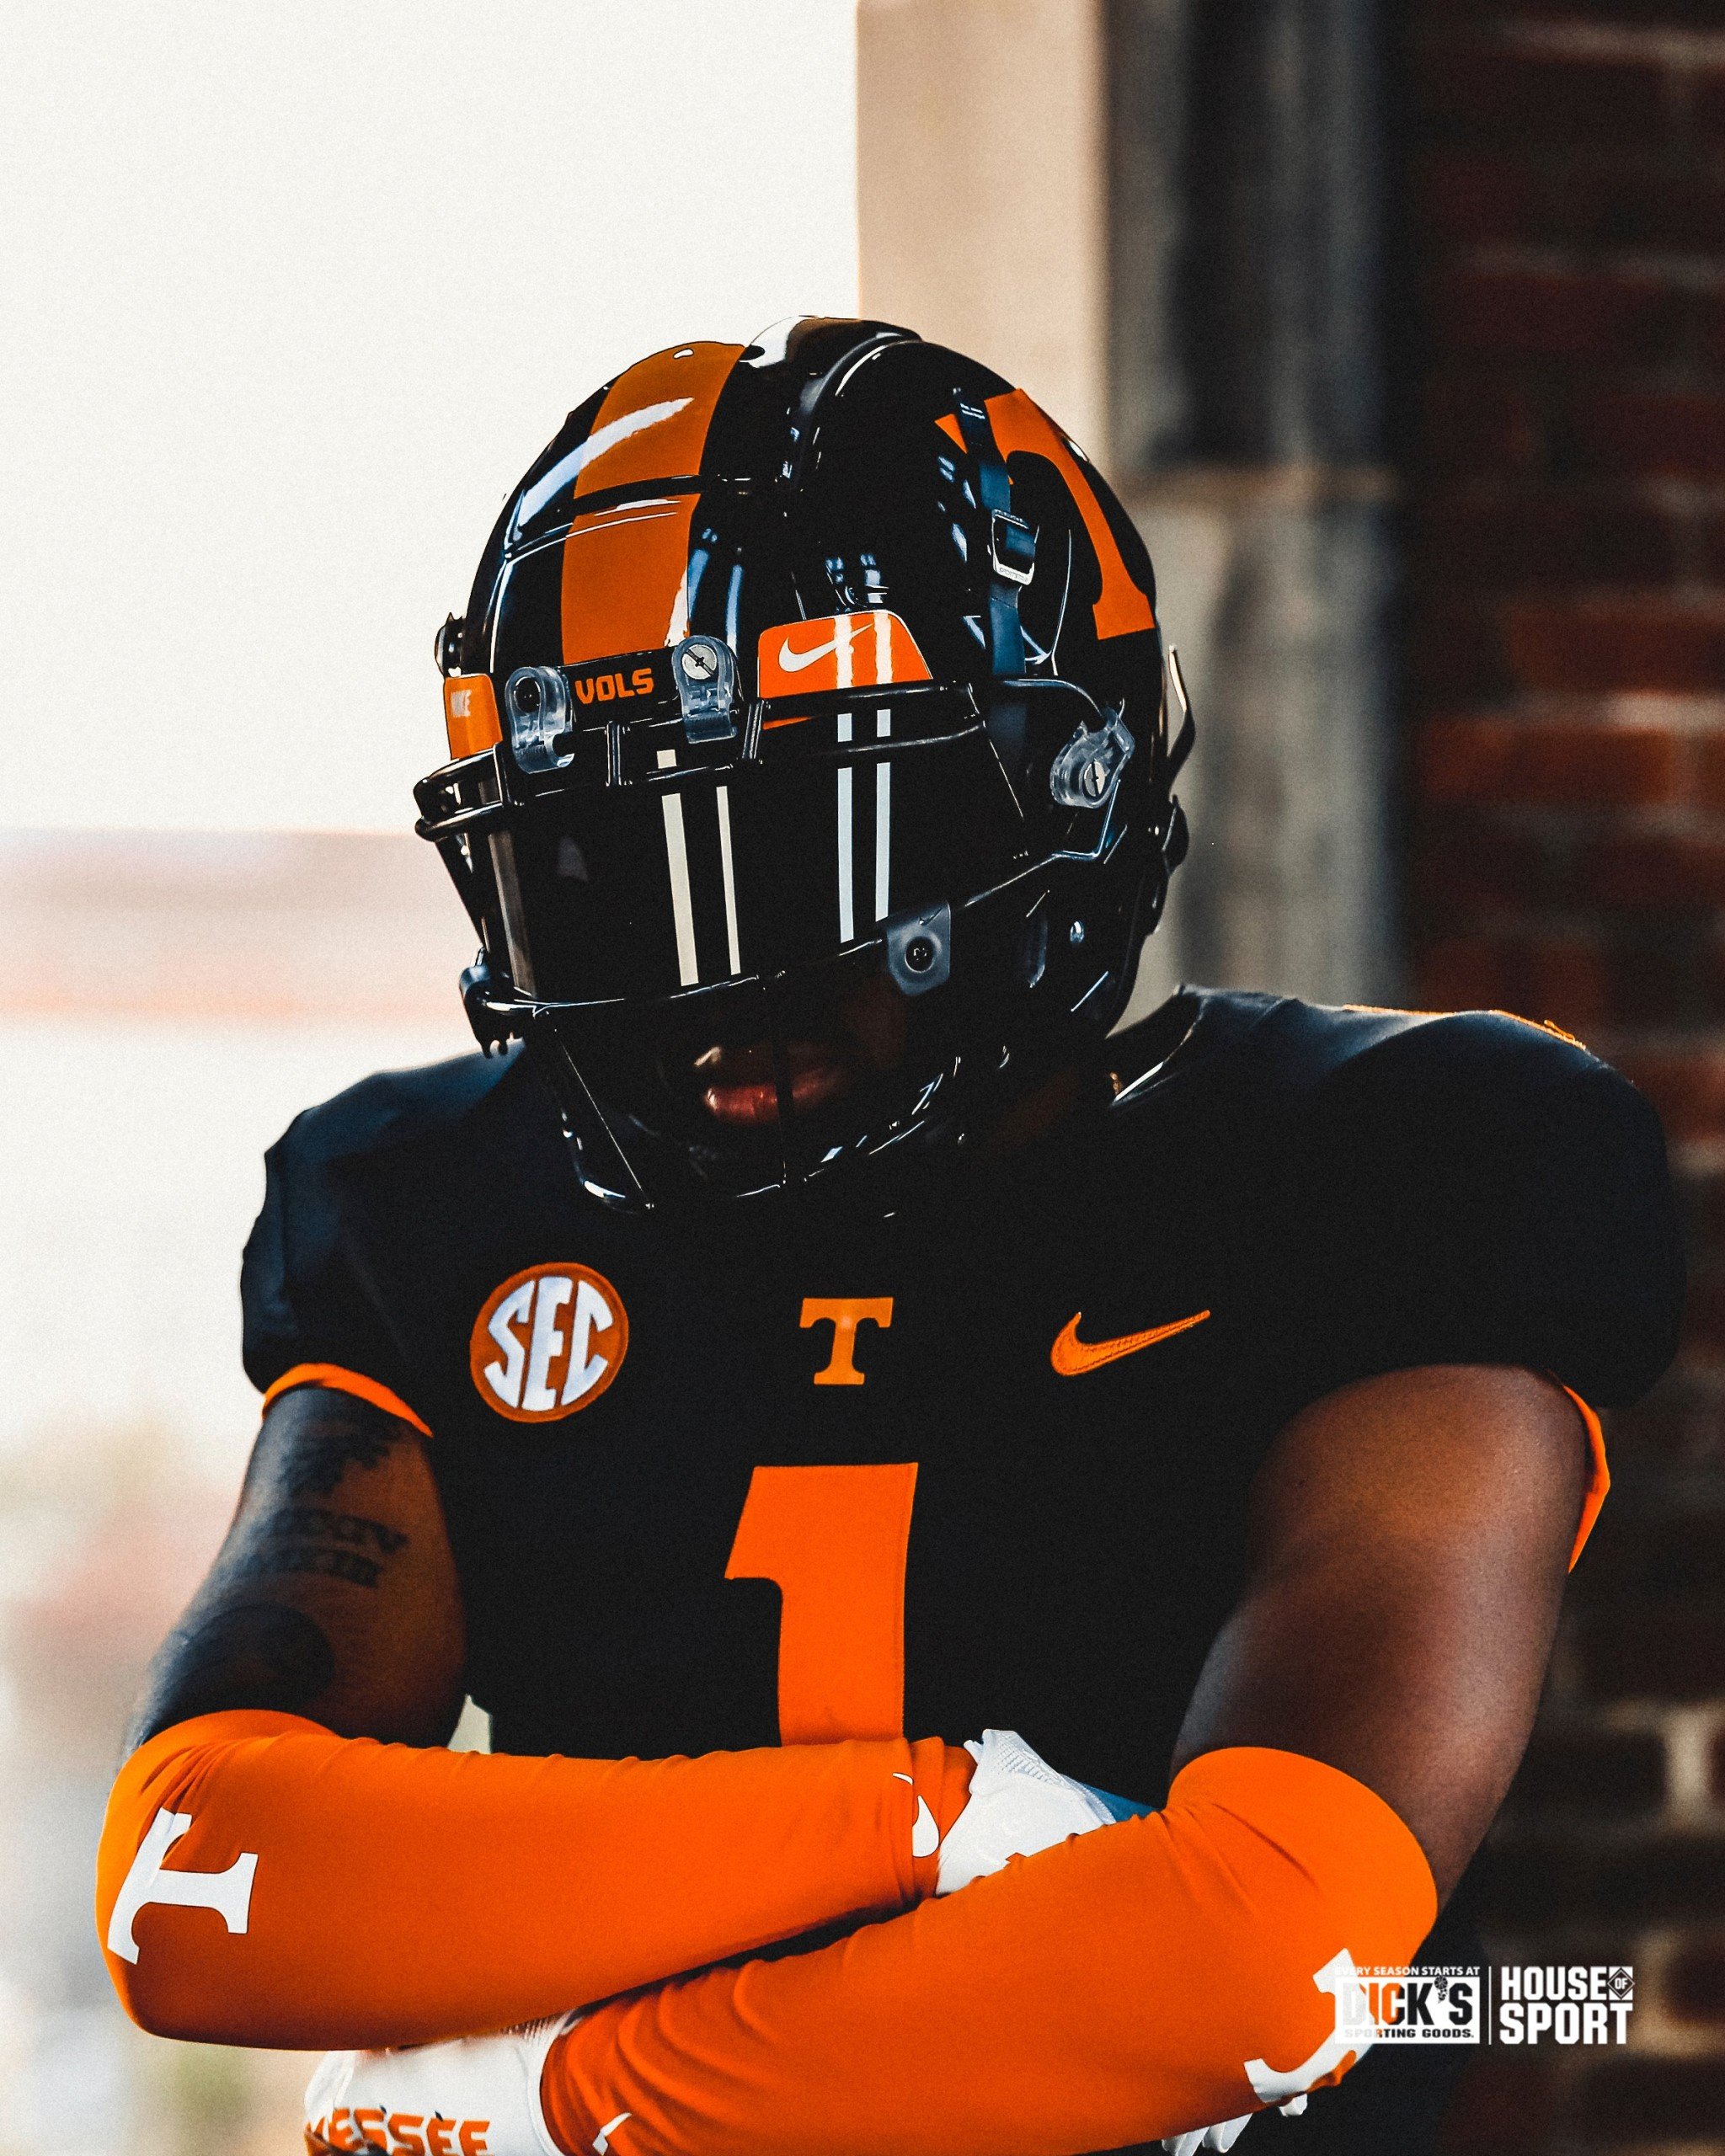 Vols Football: Which Uniforms Will Tennessee Wear In Week One?